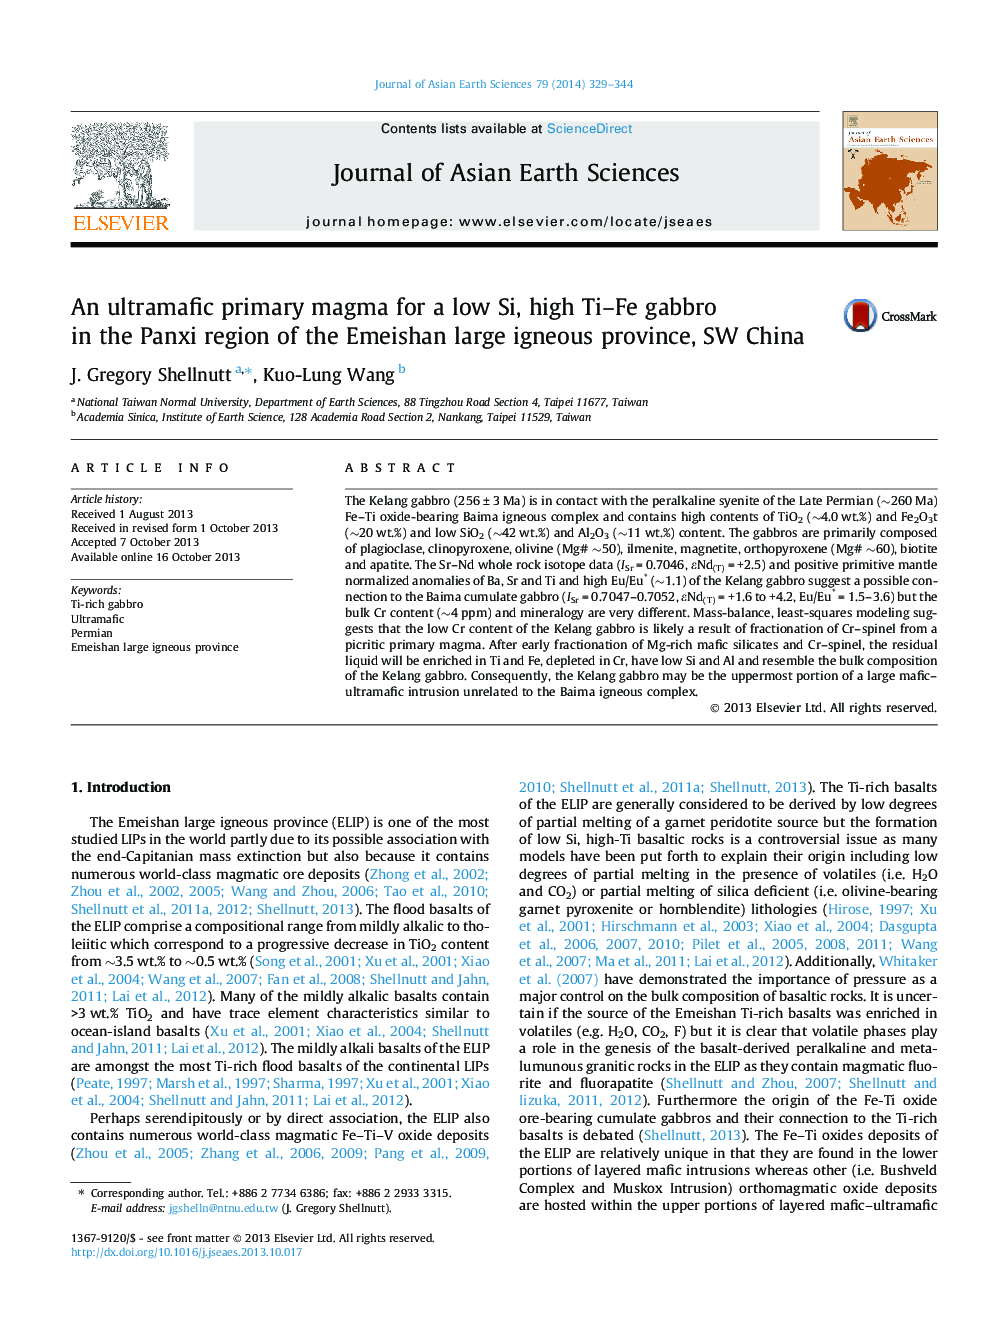 An ultramafic primary magma for a low Si, high Ti–Fe gabbro in the Panxi region of the Emeishan large igneous province, SW China